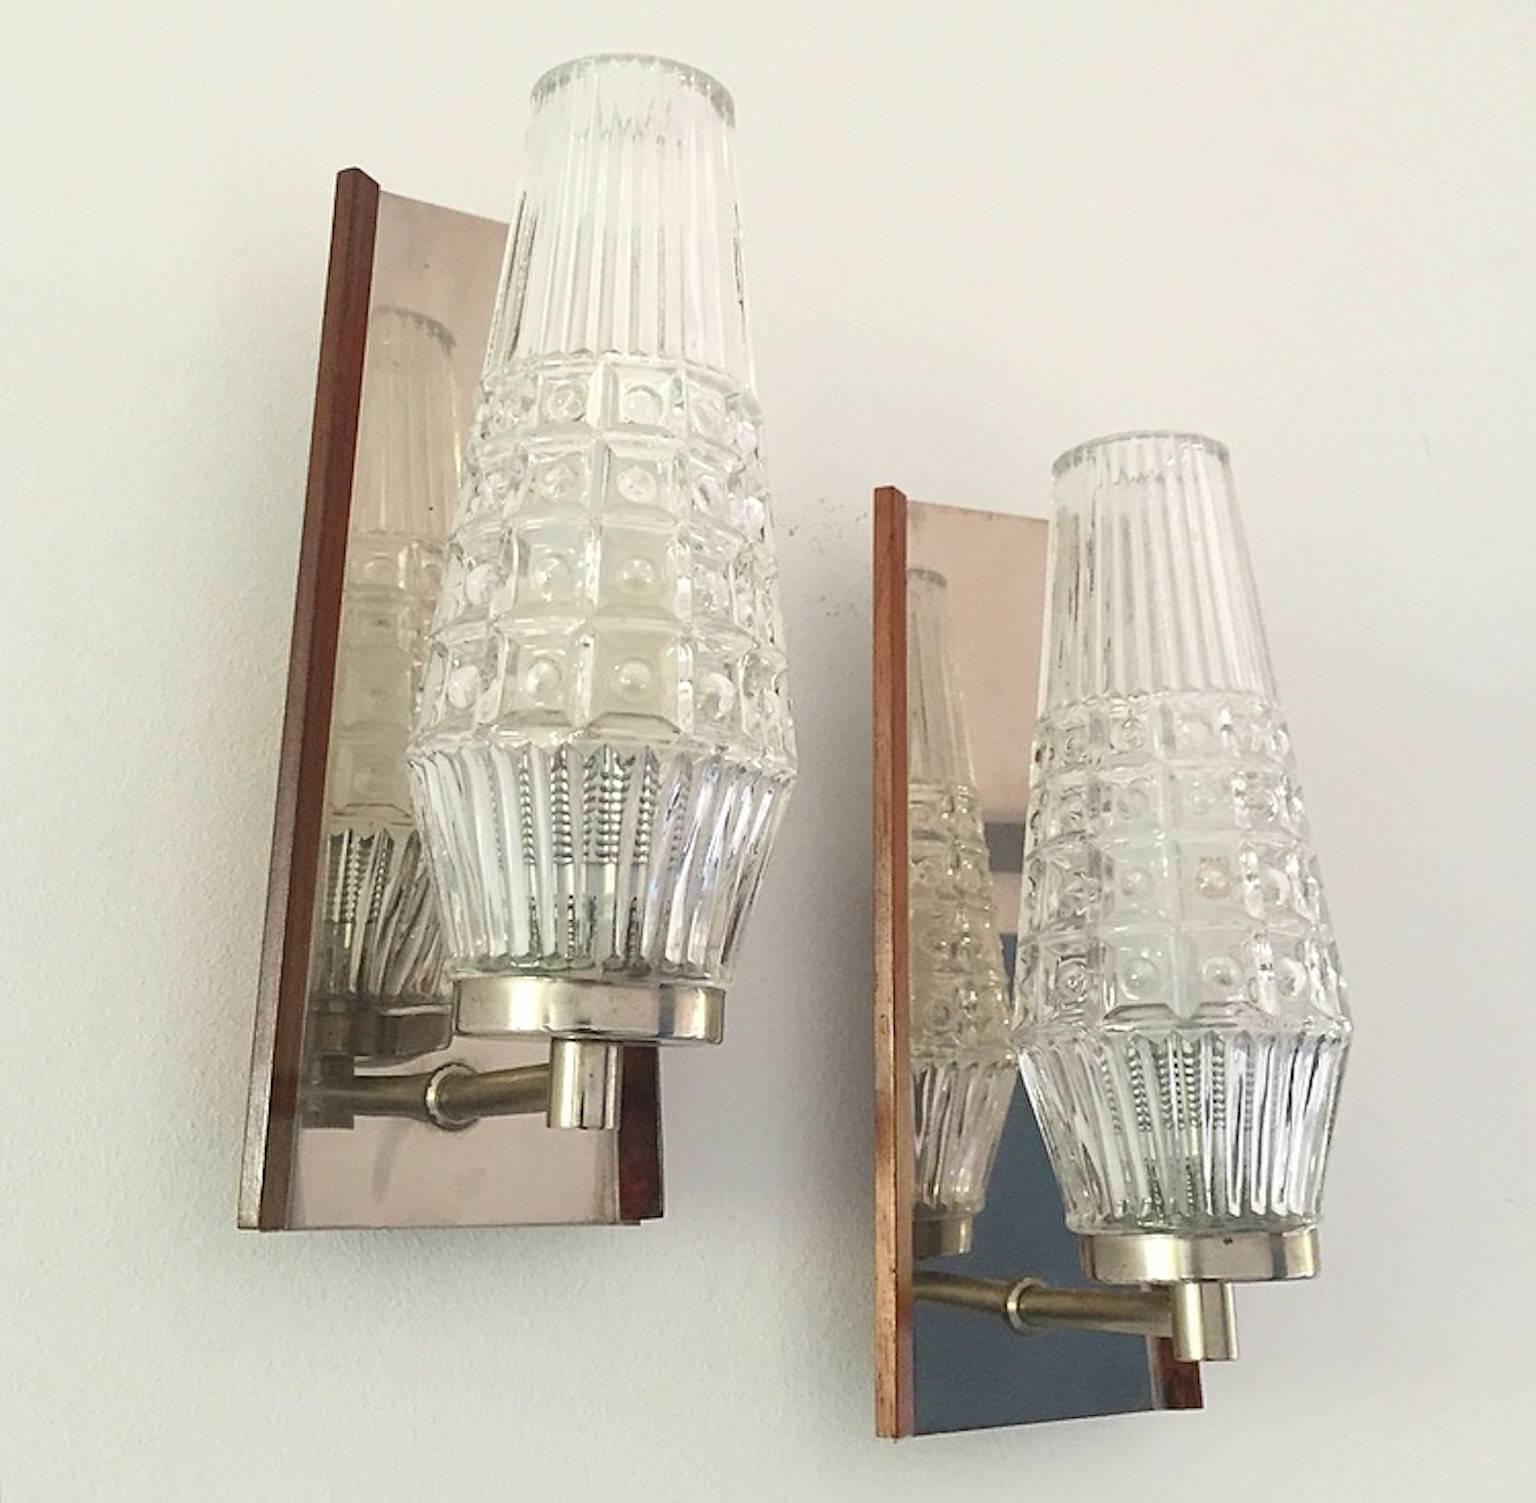 Danish Mid-Century Glass Sconces with Rosewood Details In Excellent Condition For Sale In Haderslev, DK